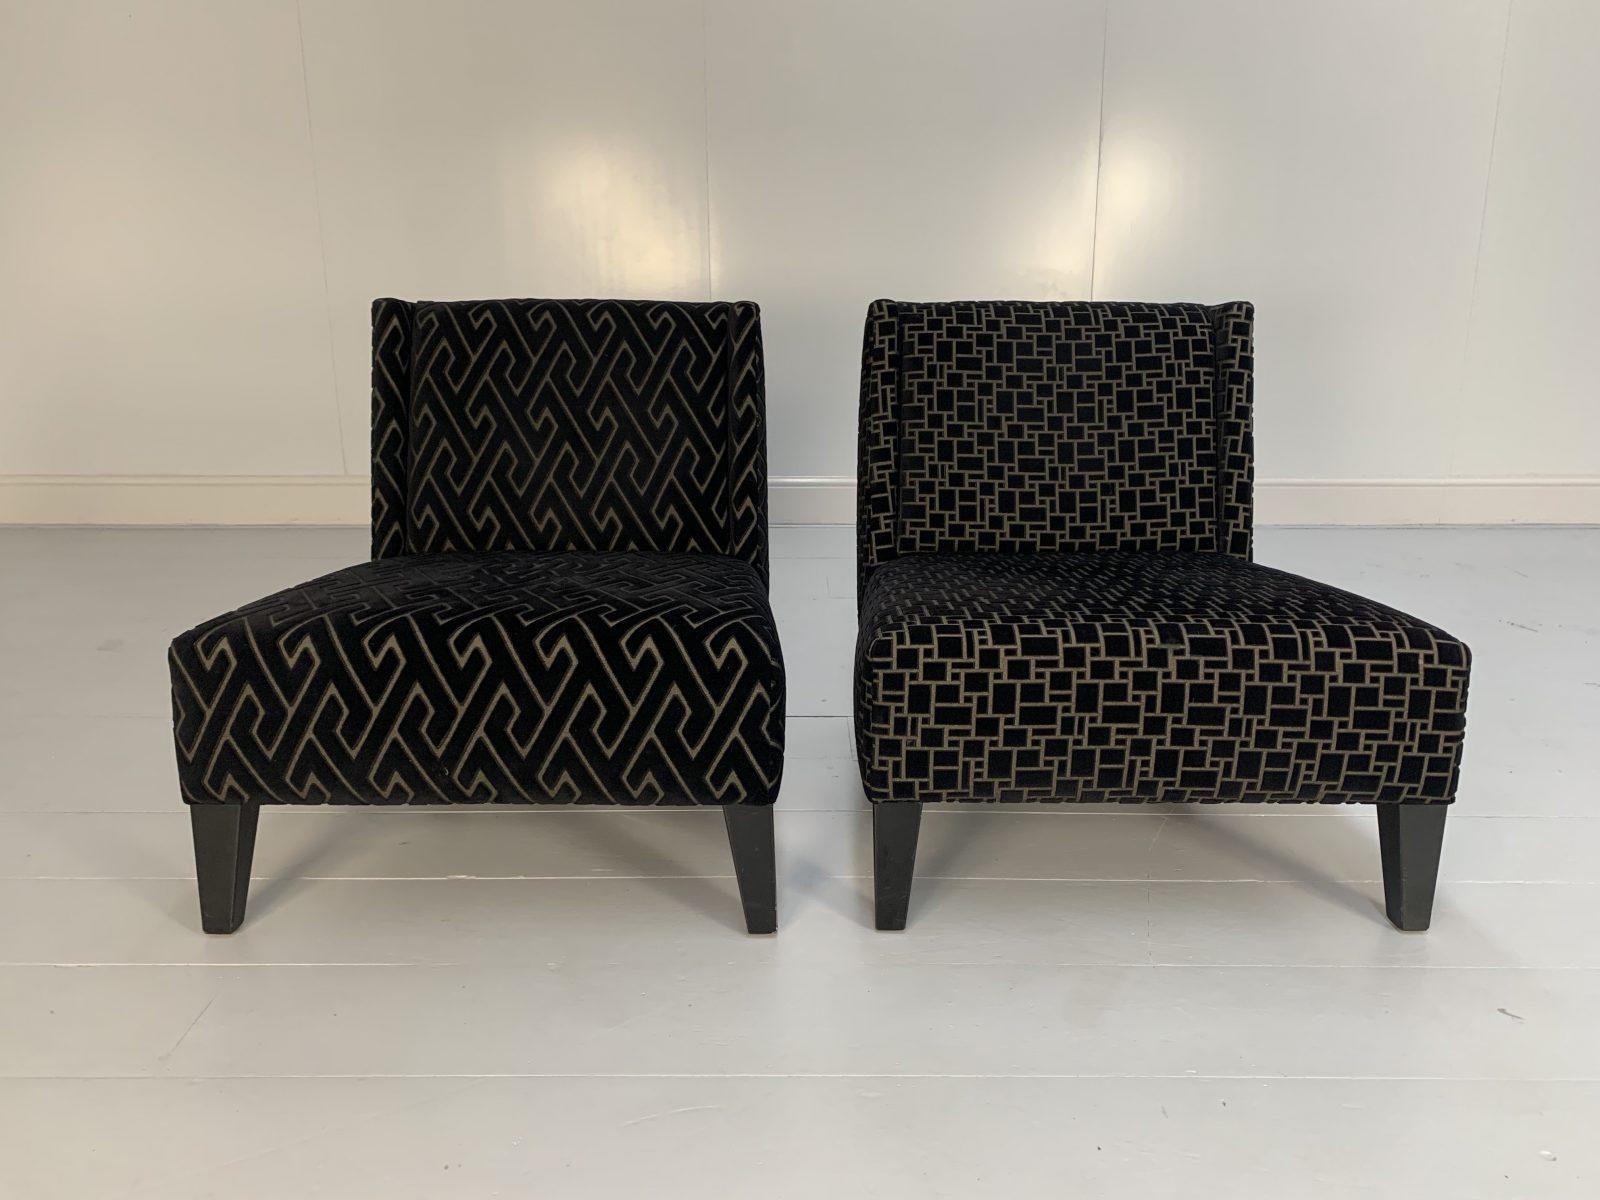 This is a superb, unashamedly-luxurious, complimenting but gently-contrasting pair of occasional chairs from the world renown French furniture house of Roche Bobois.
 
In a world of temporary pleasures, Roche Bobois create beautiful furniture that